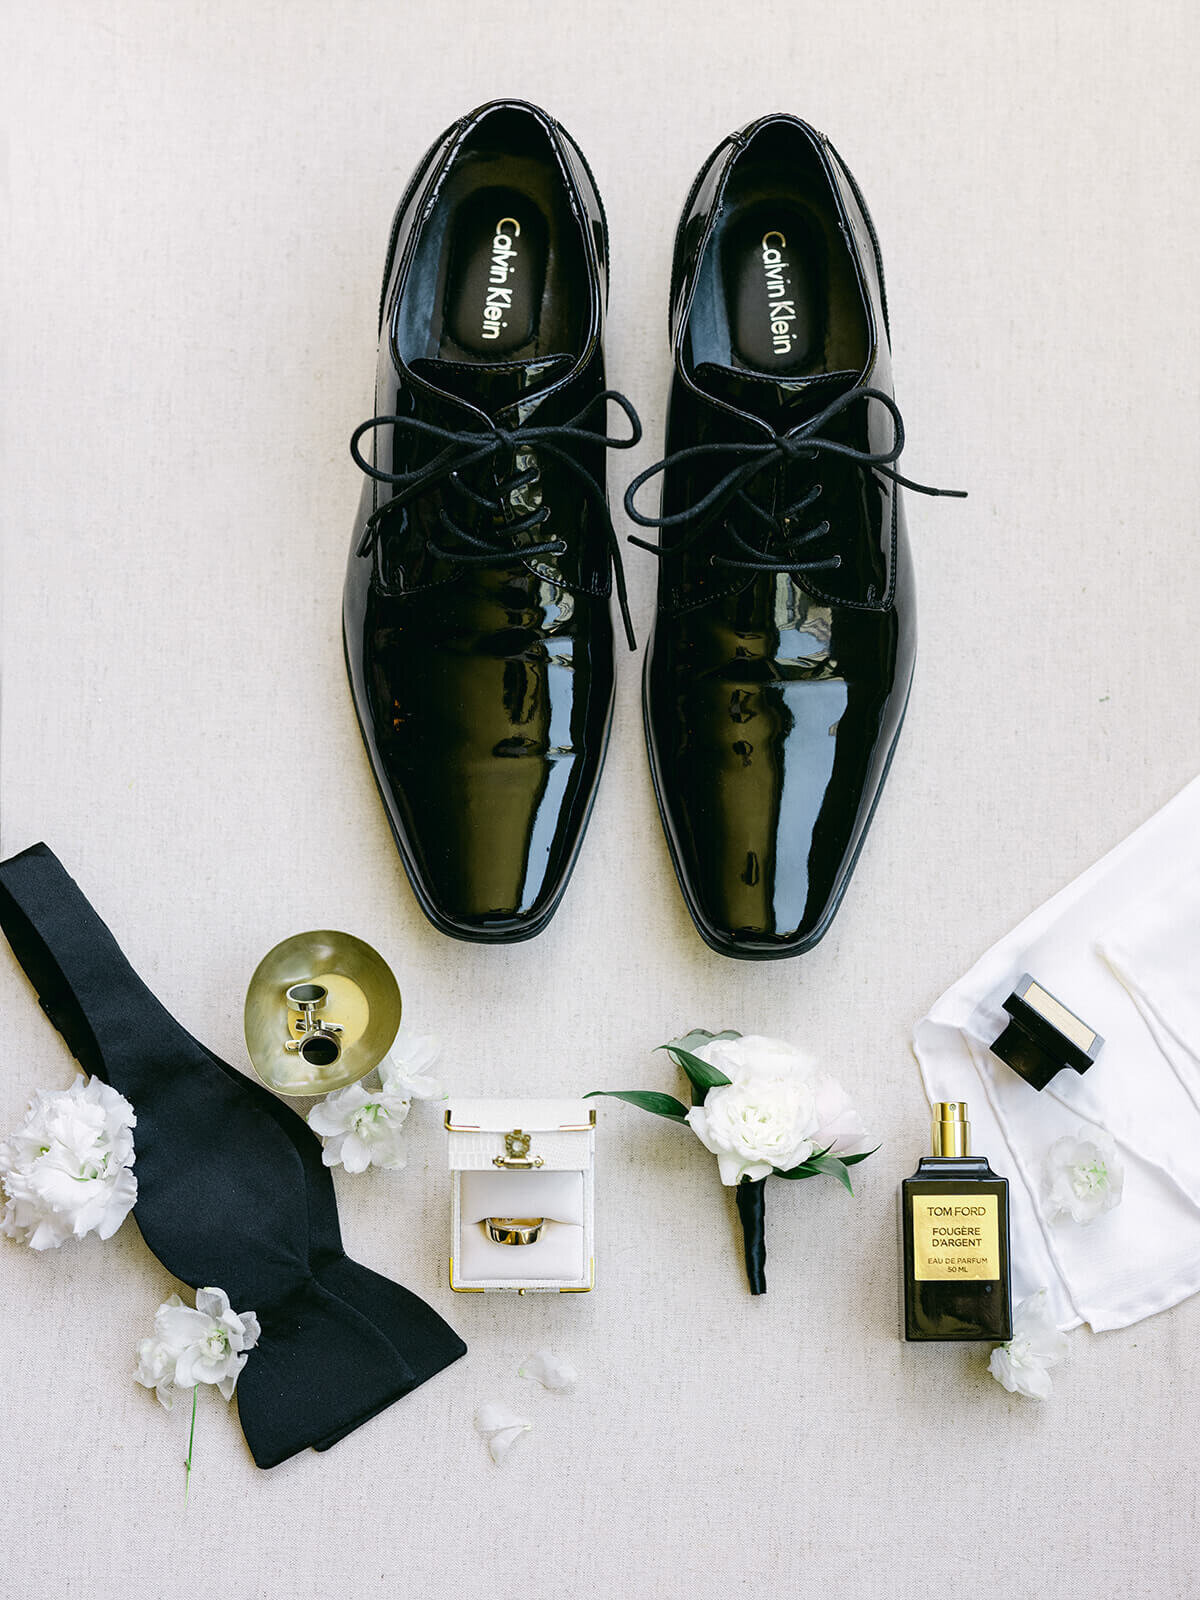 Groom's shoes, bowtie, cologne, and boutonniere details